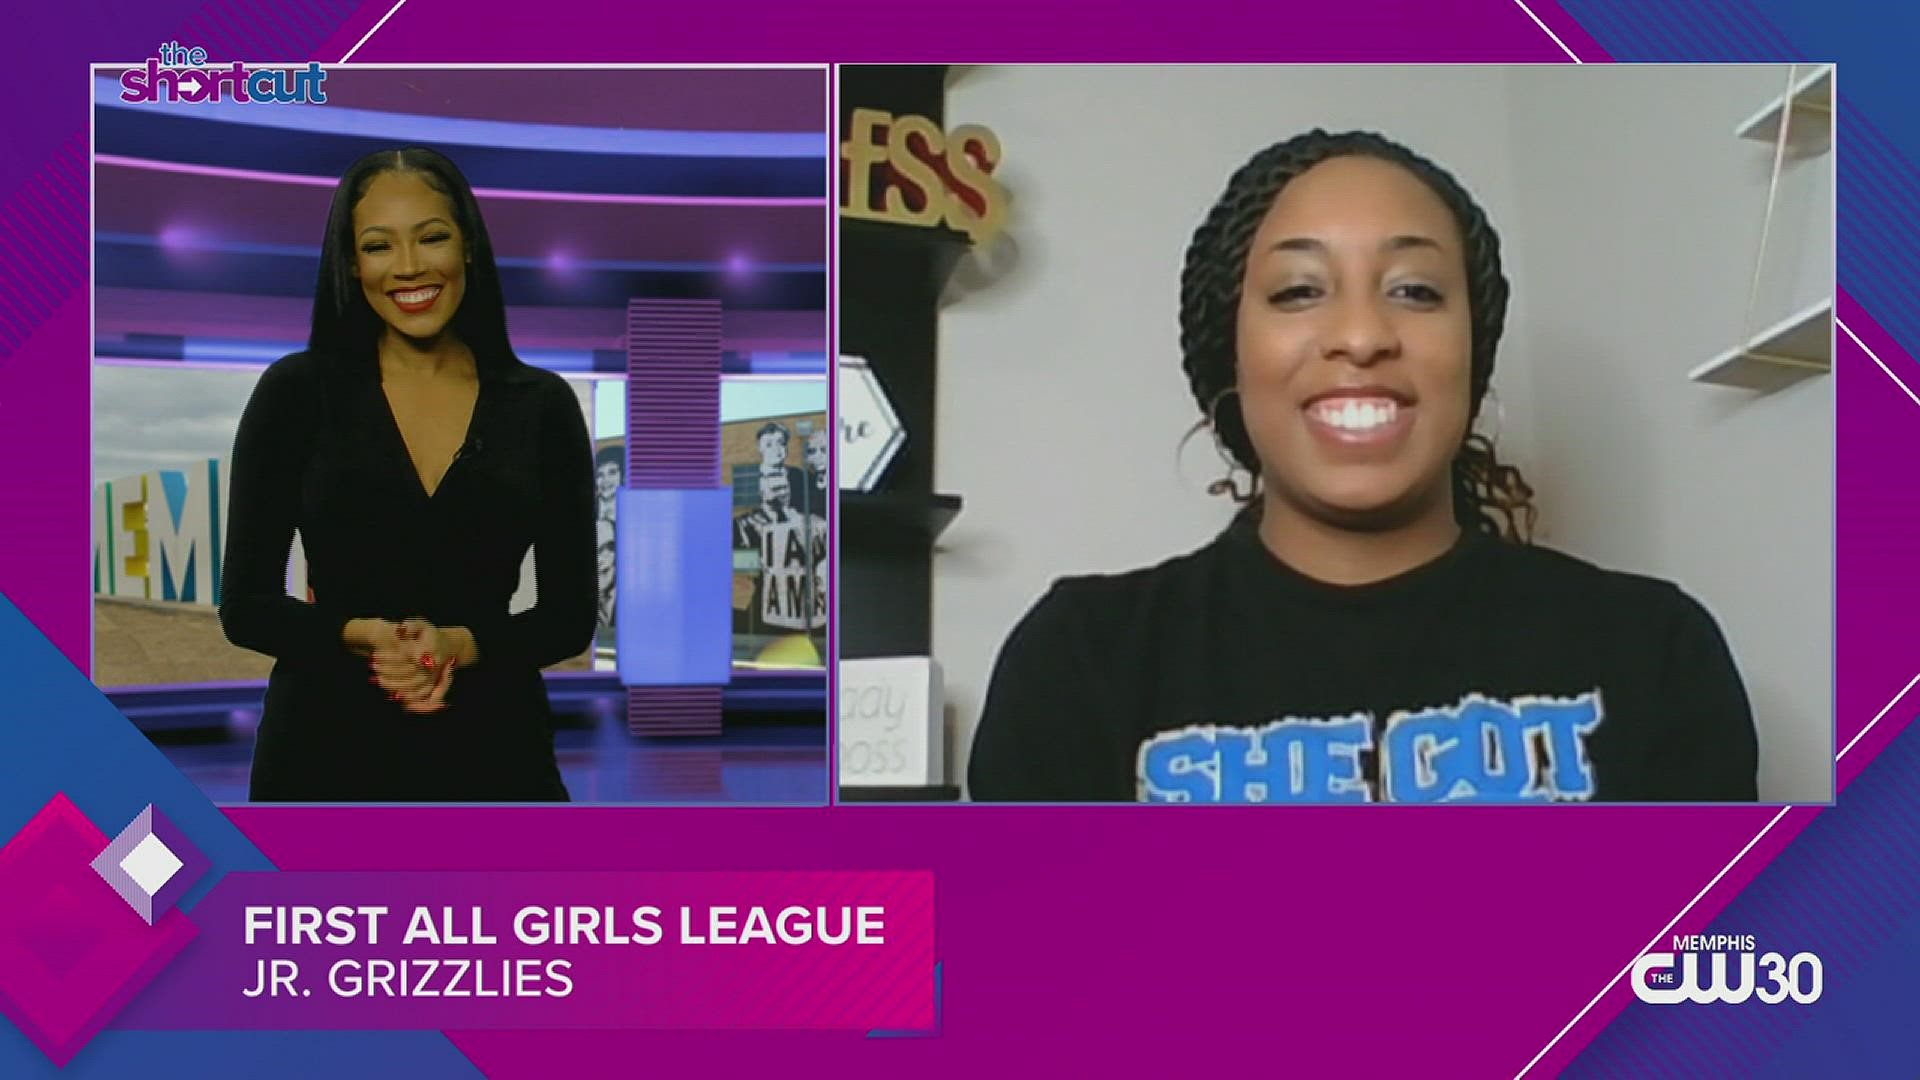 Get a sneak peak of the first all girls basketball league in Memphis for girls in 3rd through 5th grade with She Got Game founder Celia "Cece" Newman! Plus more!